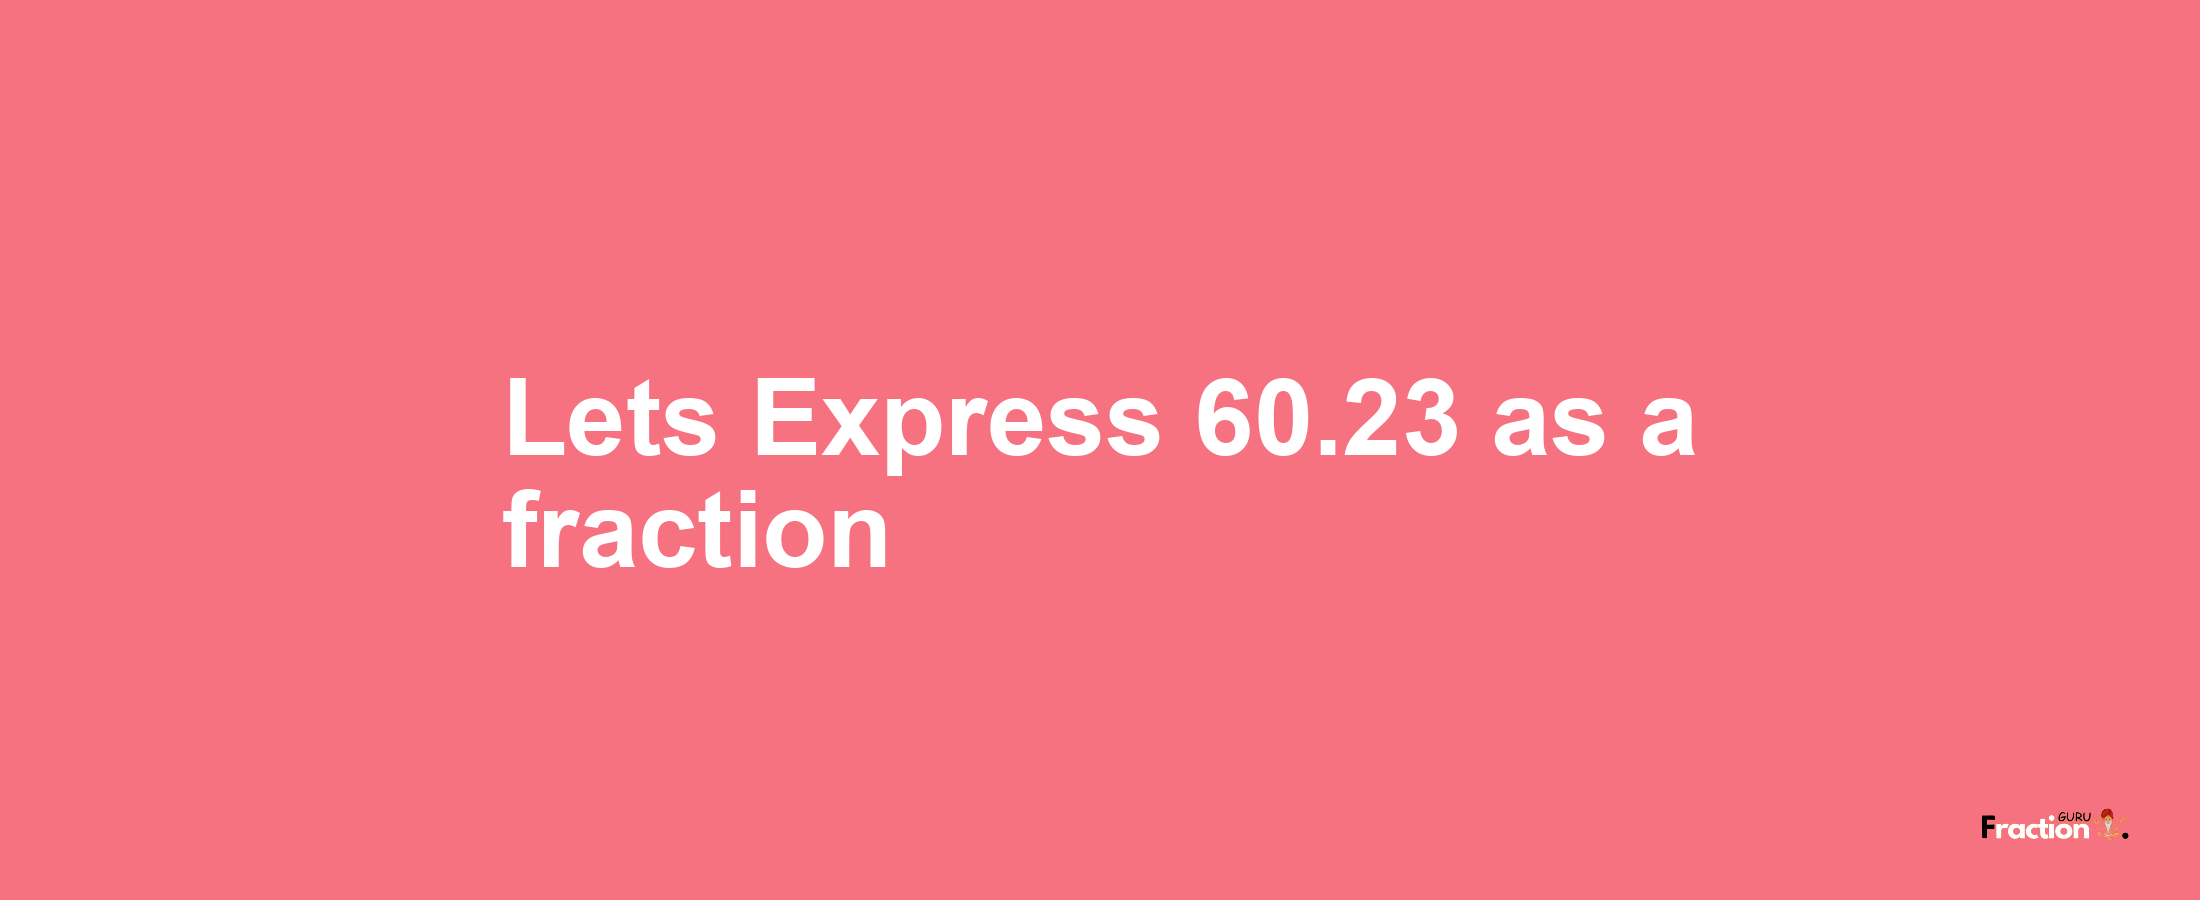 Lets Express 60.23 as afraction